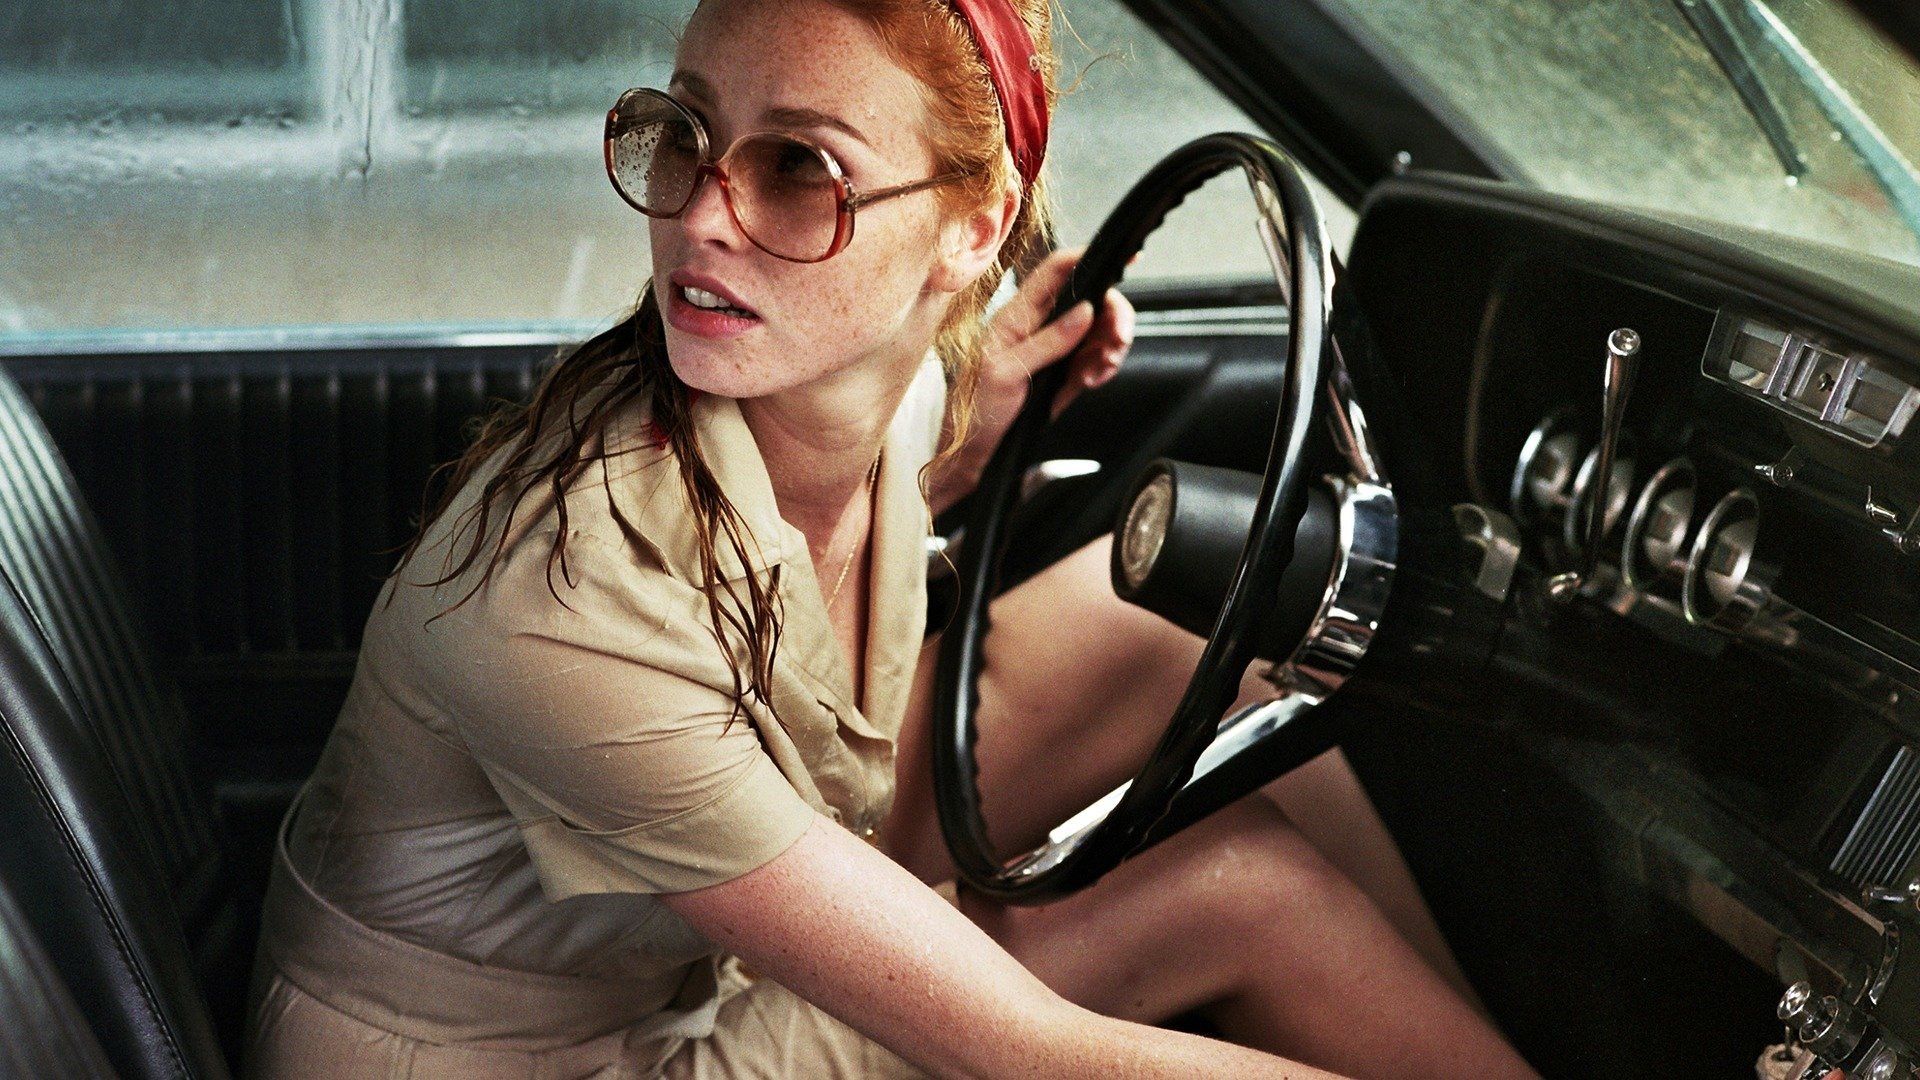 The Lady in the Car with Glasses and a Gun Backdrop